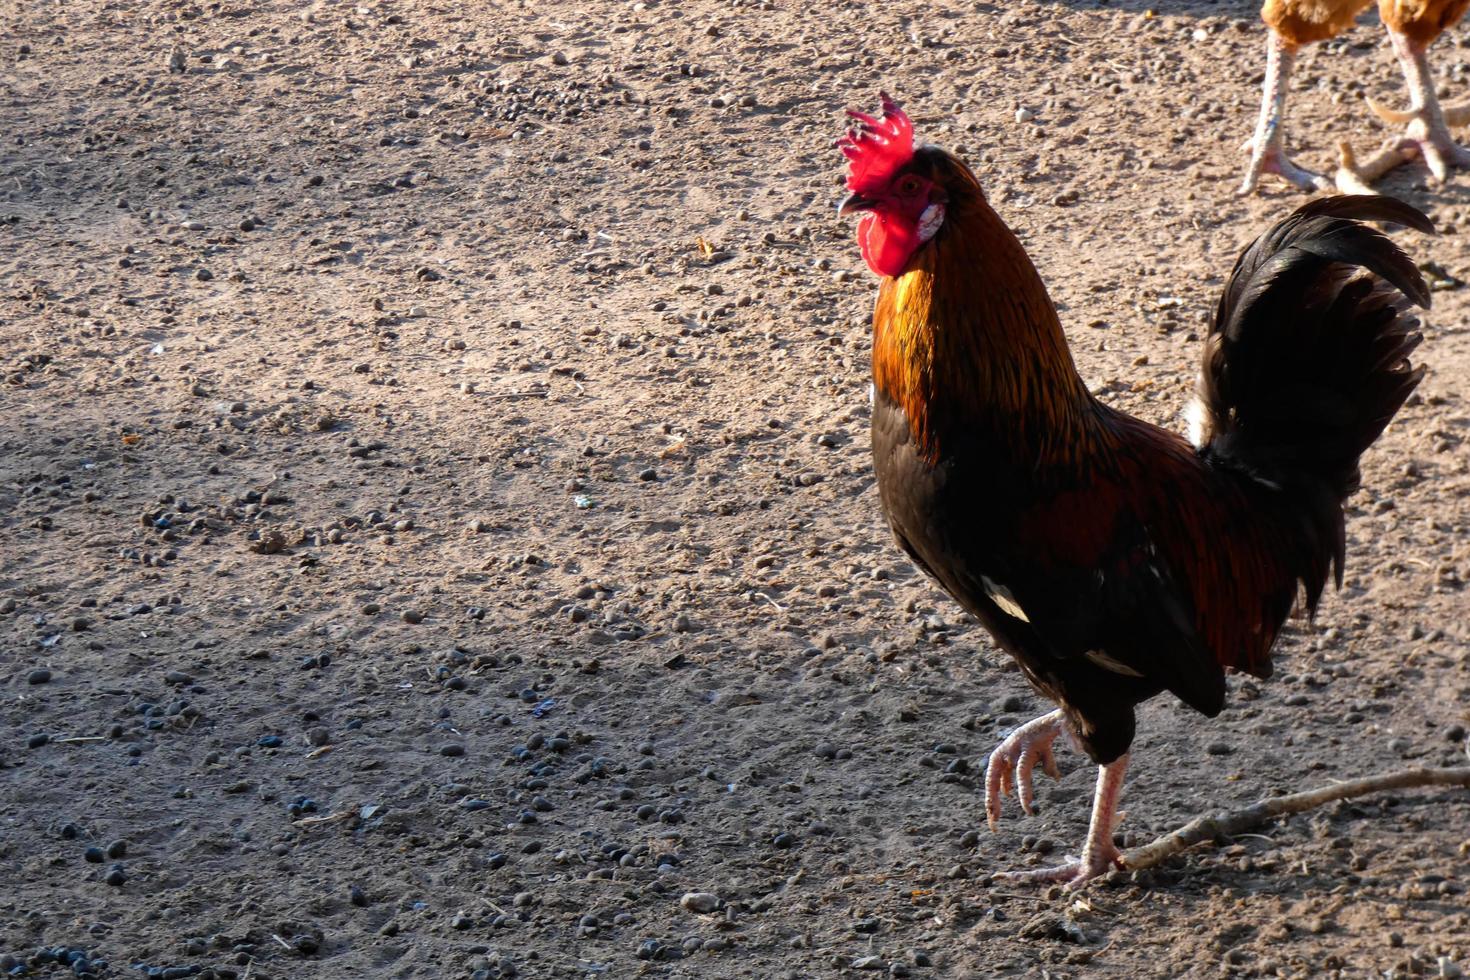 Free-range roosters and hens on a farm photo